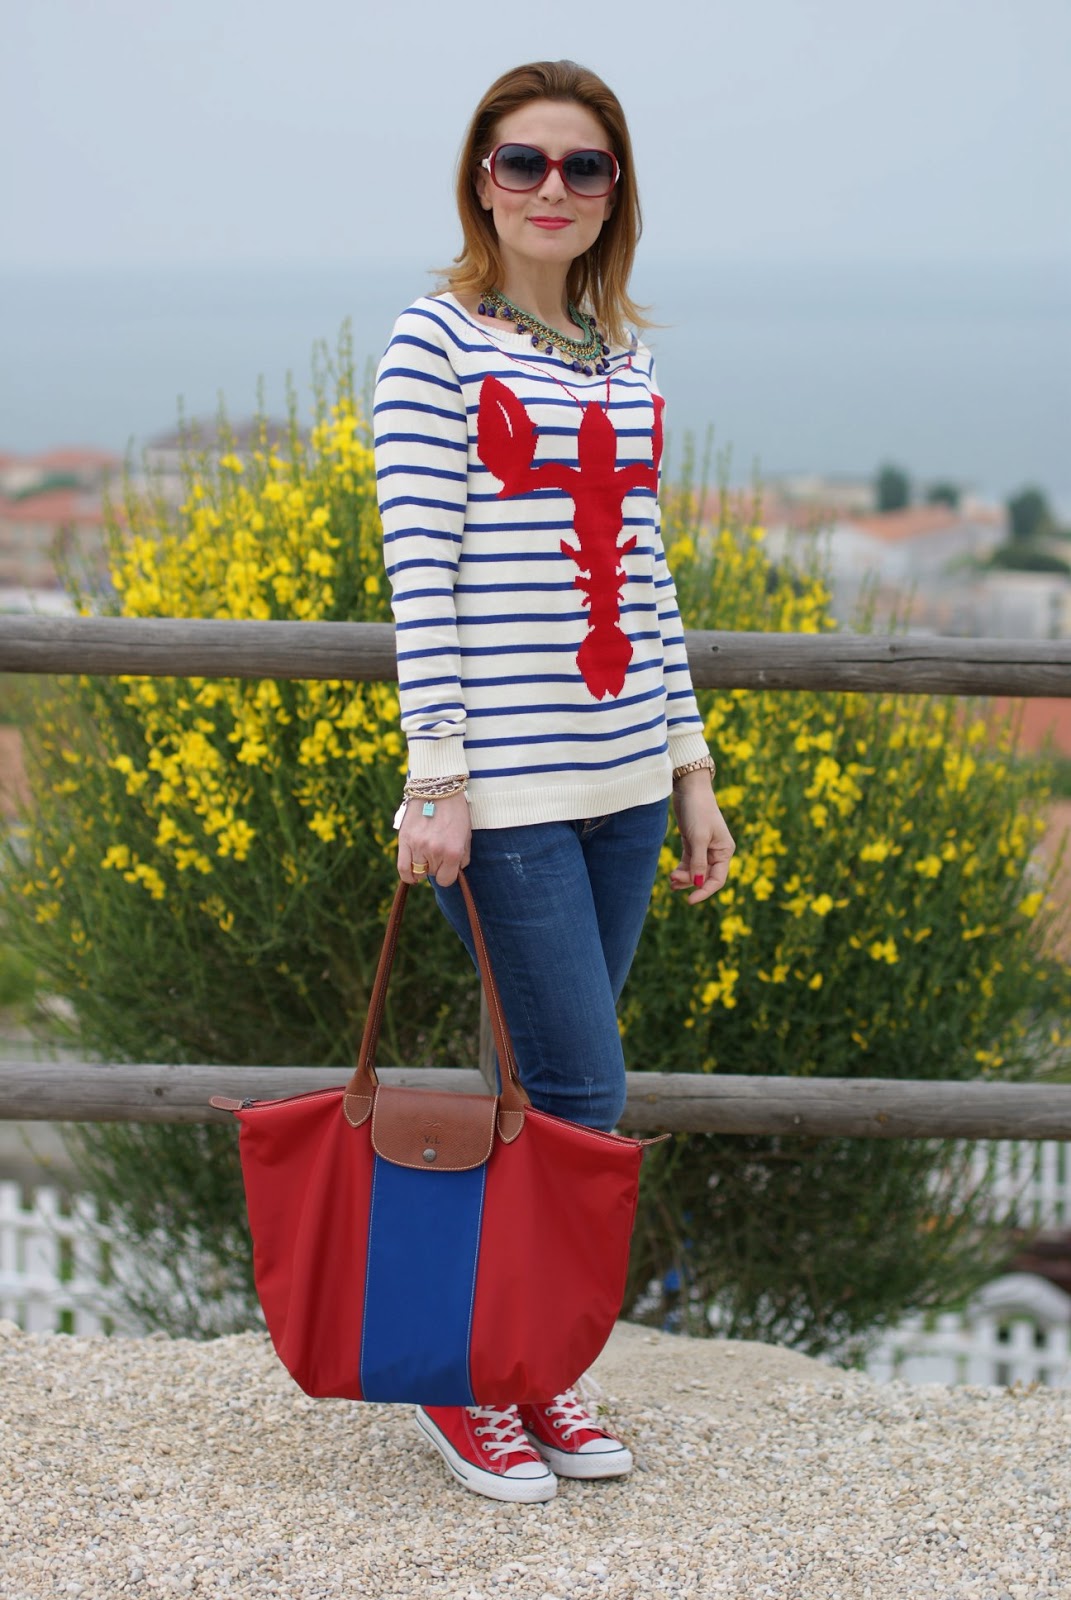 Lobster sweater and new Firmoo sunglasses | Fashion and Cookies ...